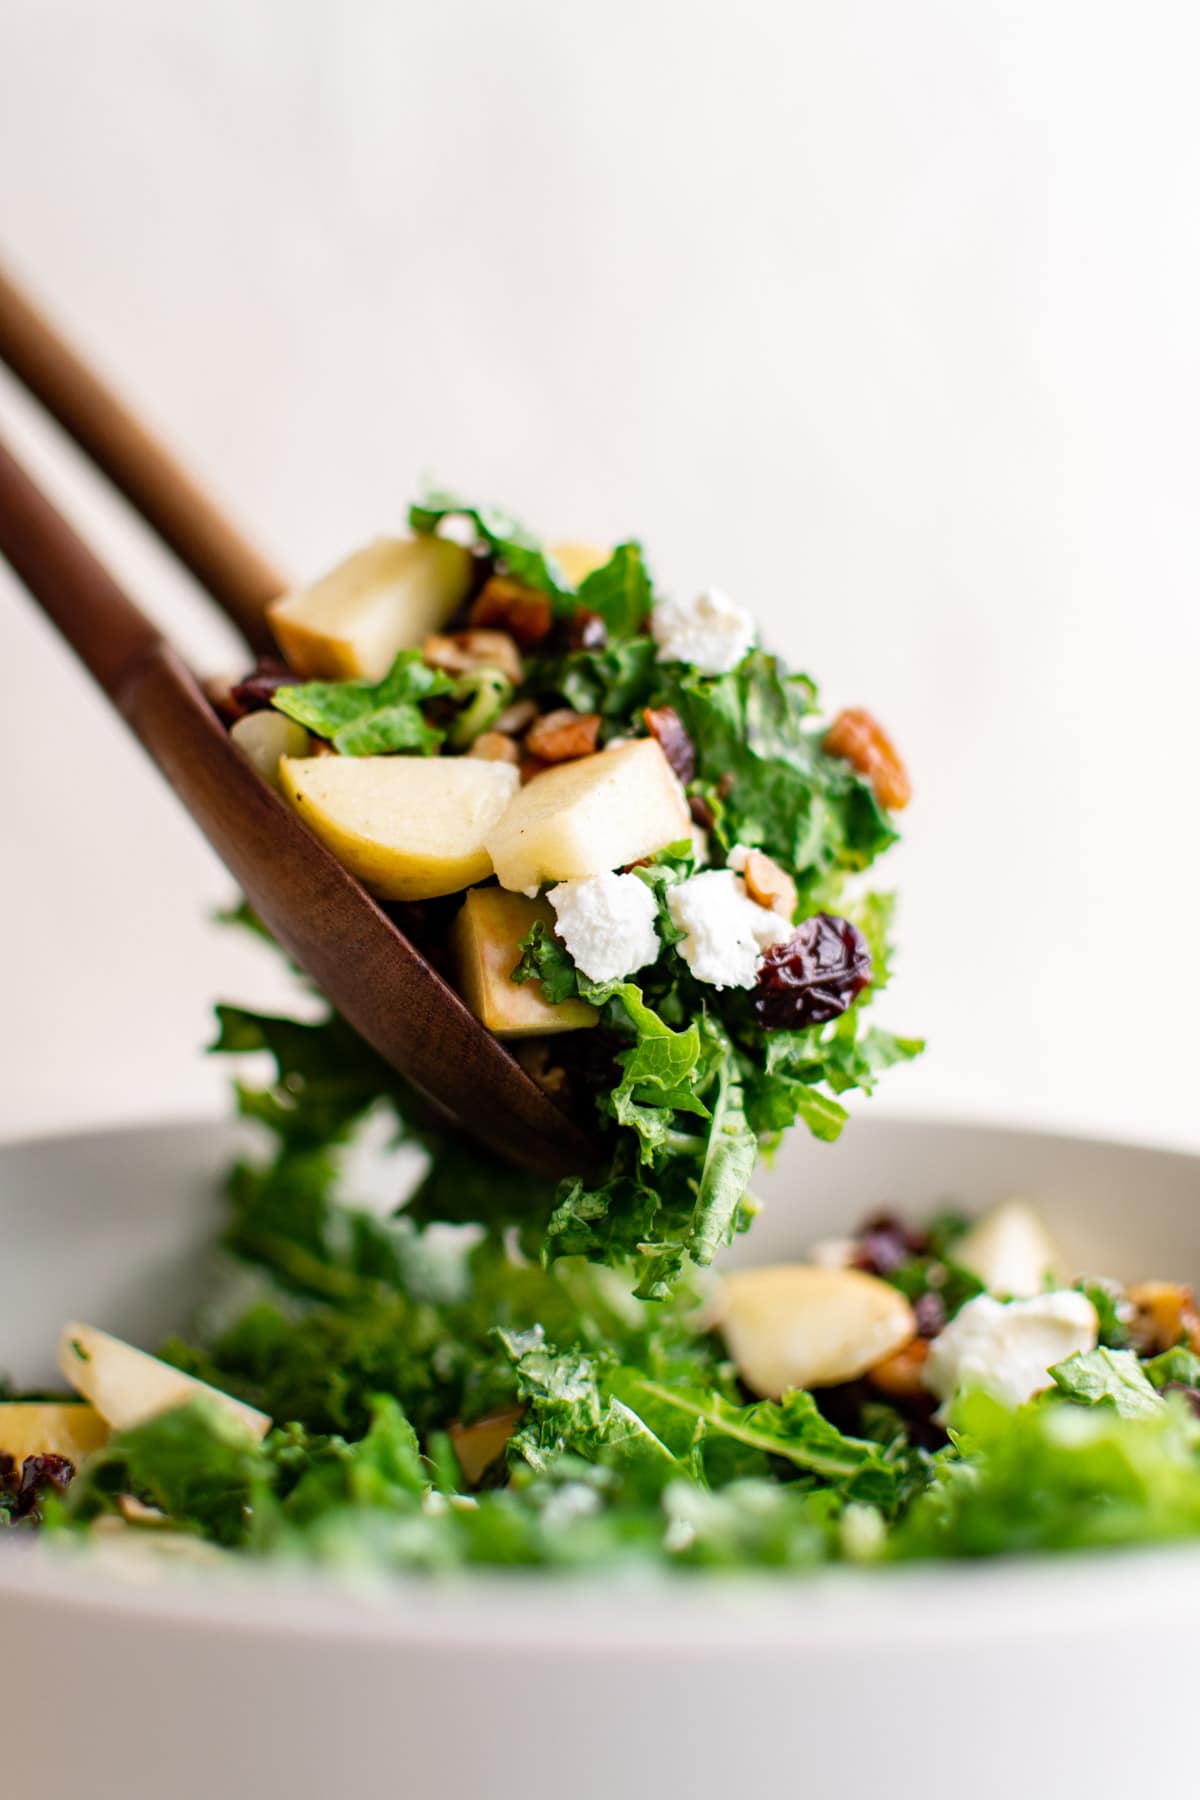 Kale salad with tongs.